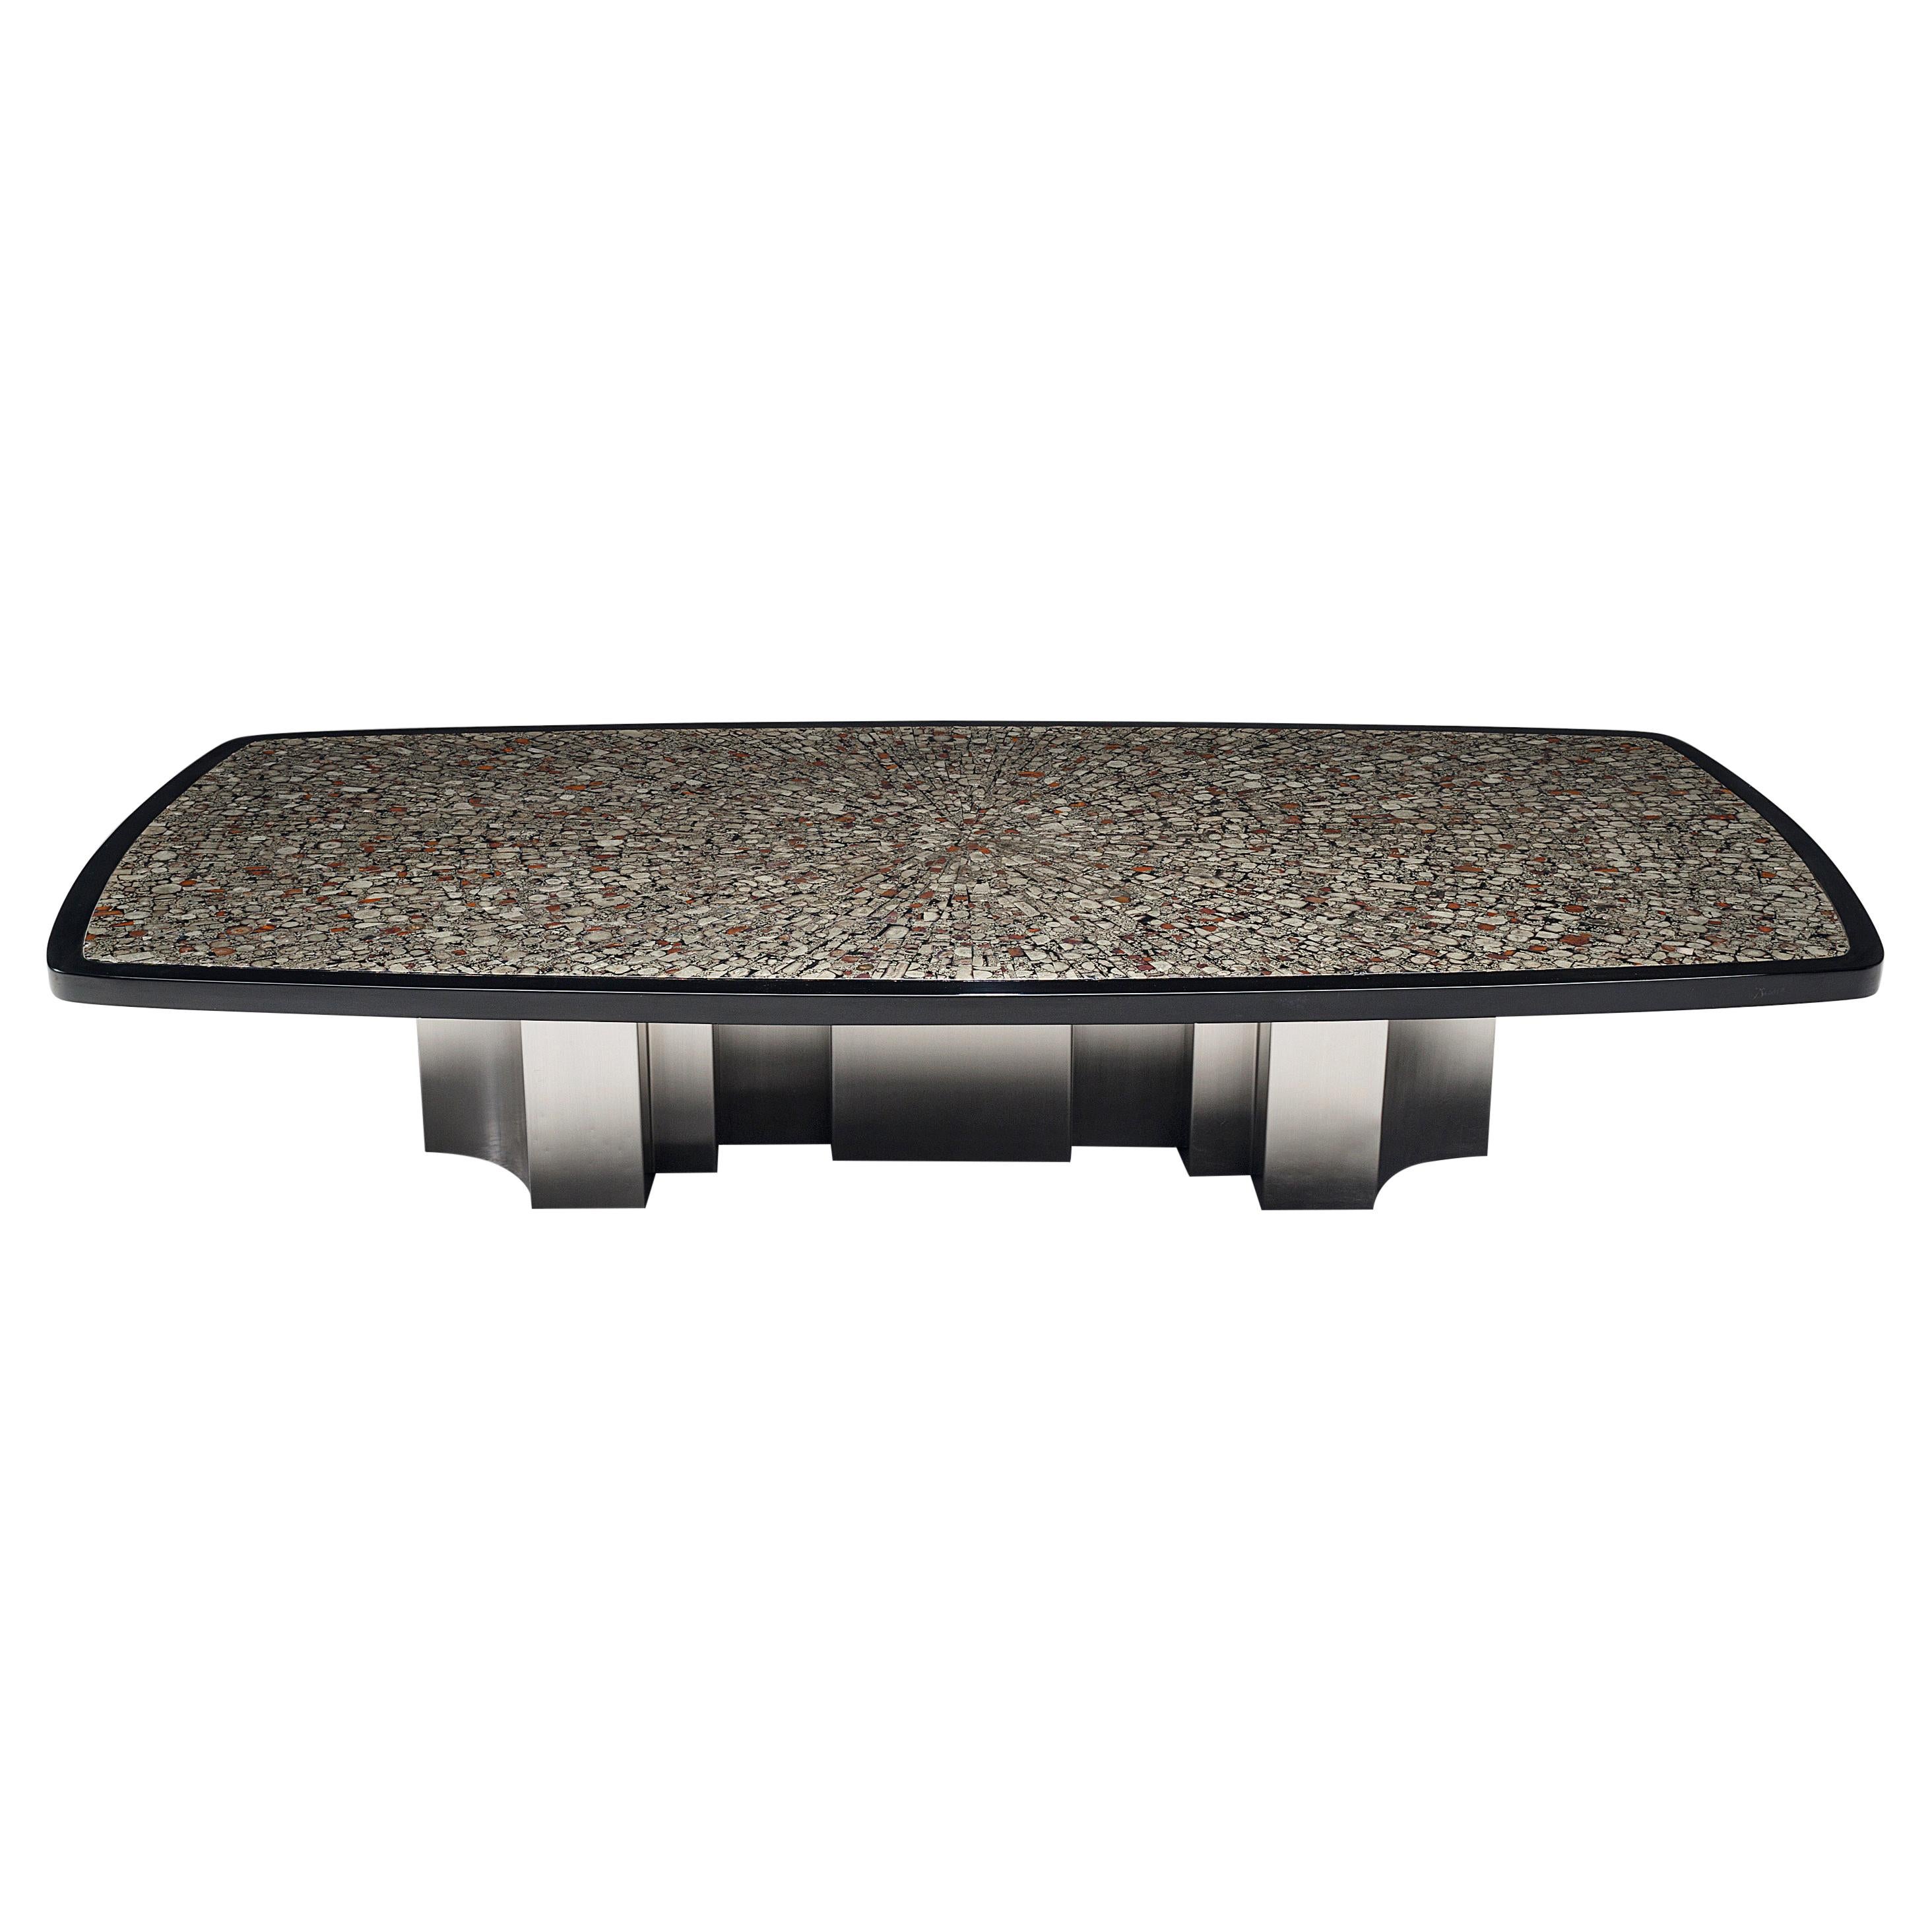 Large Jean Claude Dresse Coffee Table with Inlay of Marcasite